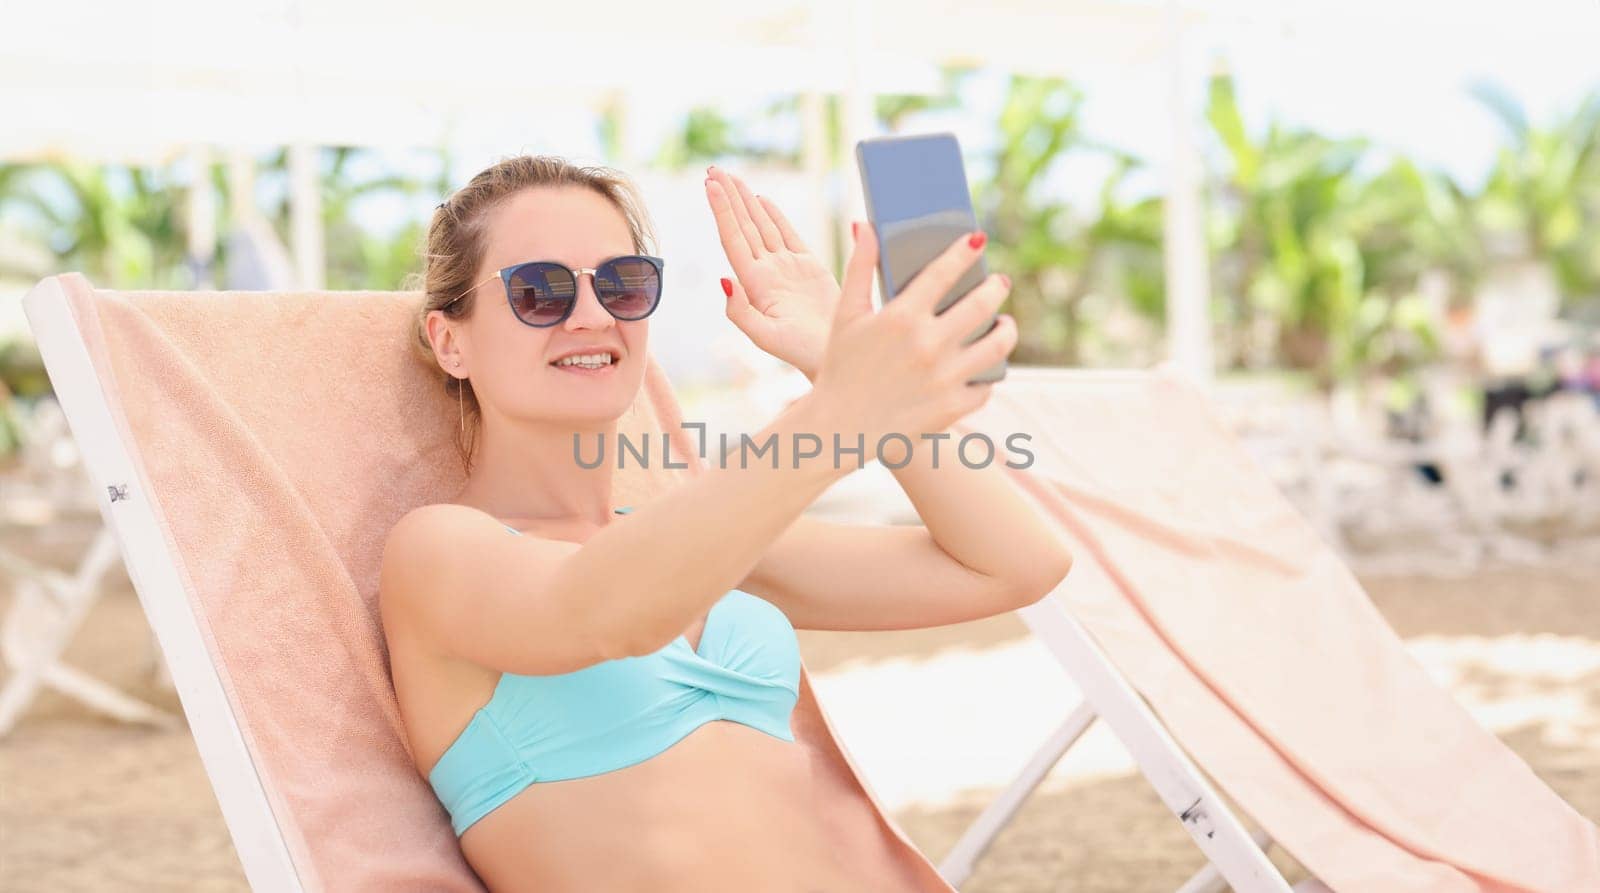 A woman in a swimsuit lies on a sun lounge, close-up by kuprevich